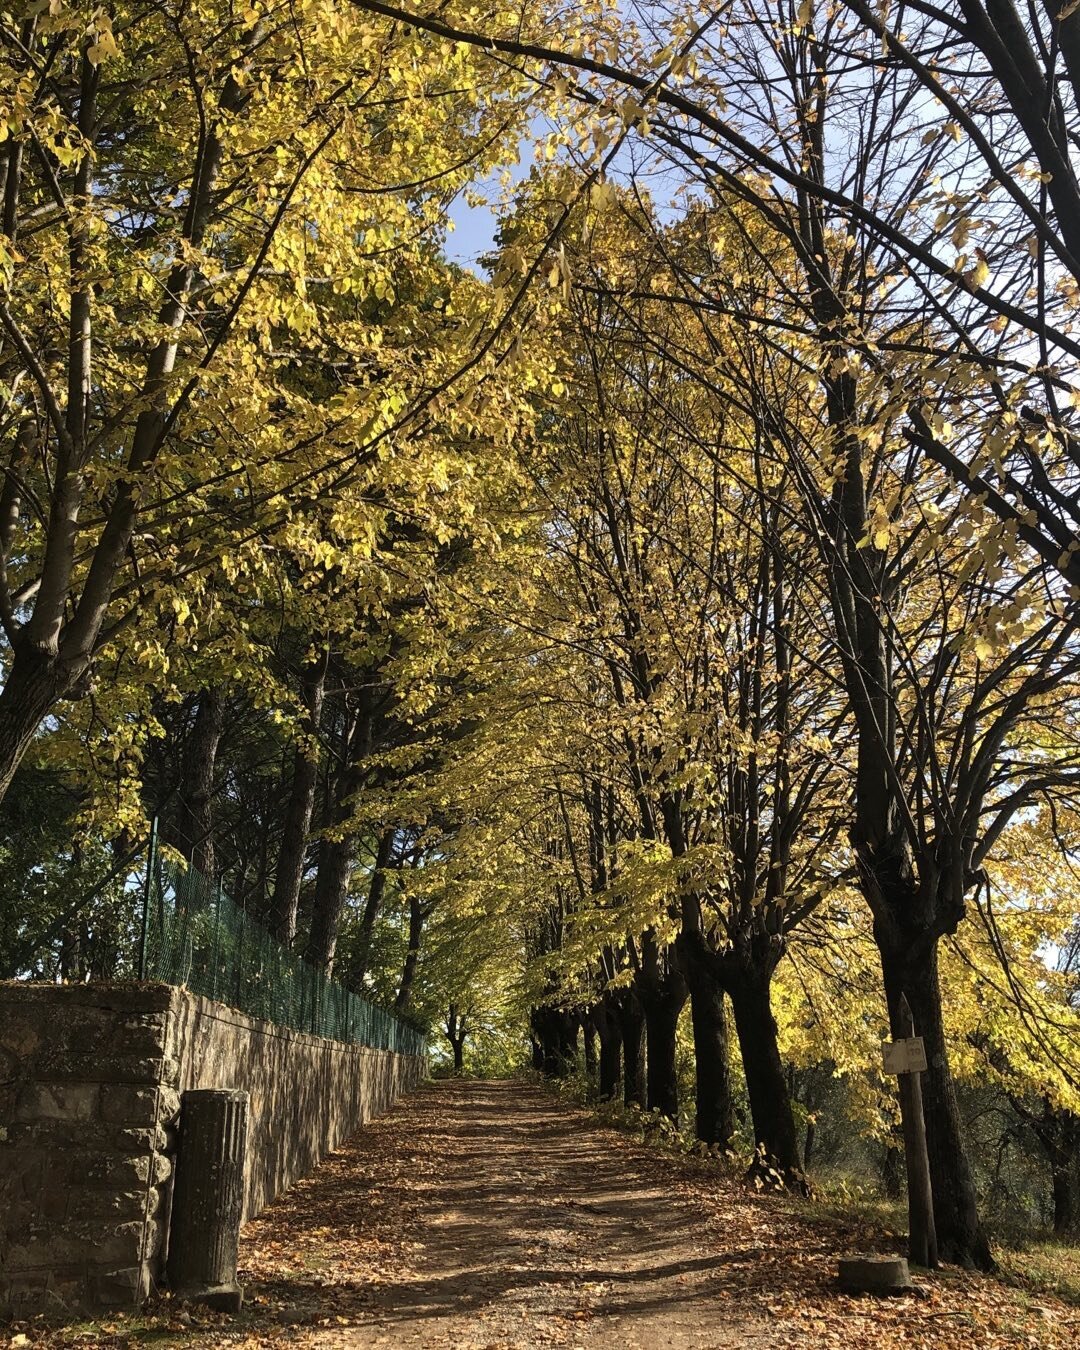 Fall in Tuscany, a great time for walking in the countryside from village to village. Join us late fall or early spring. Farm to table dining, cheese and wine tastings, cooking classes and more. Private guide and transportation. #discovertuscanybiz#w